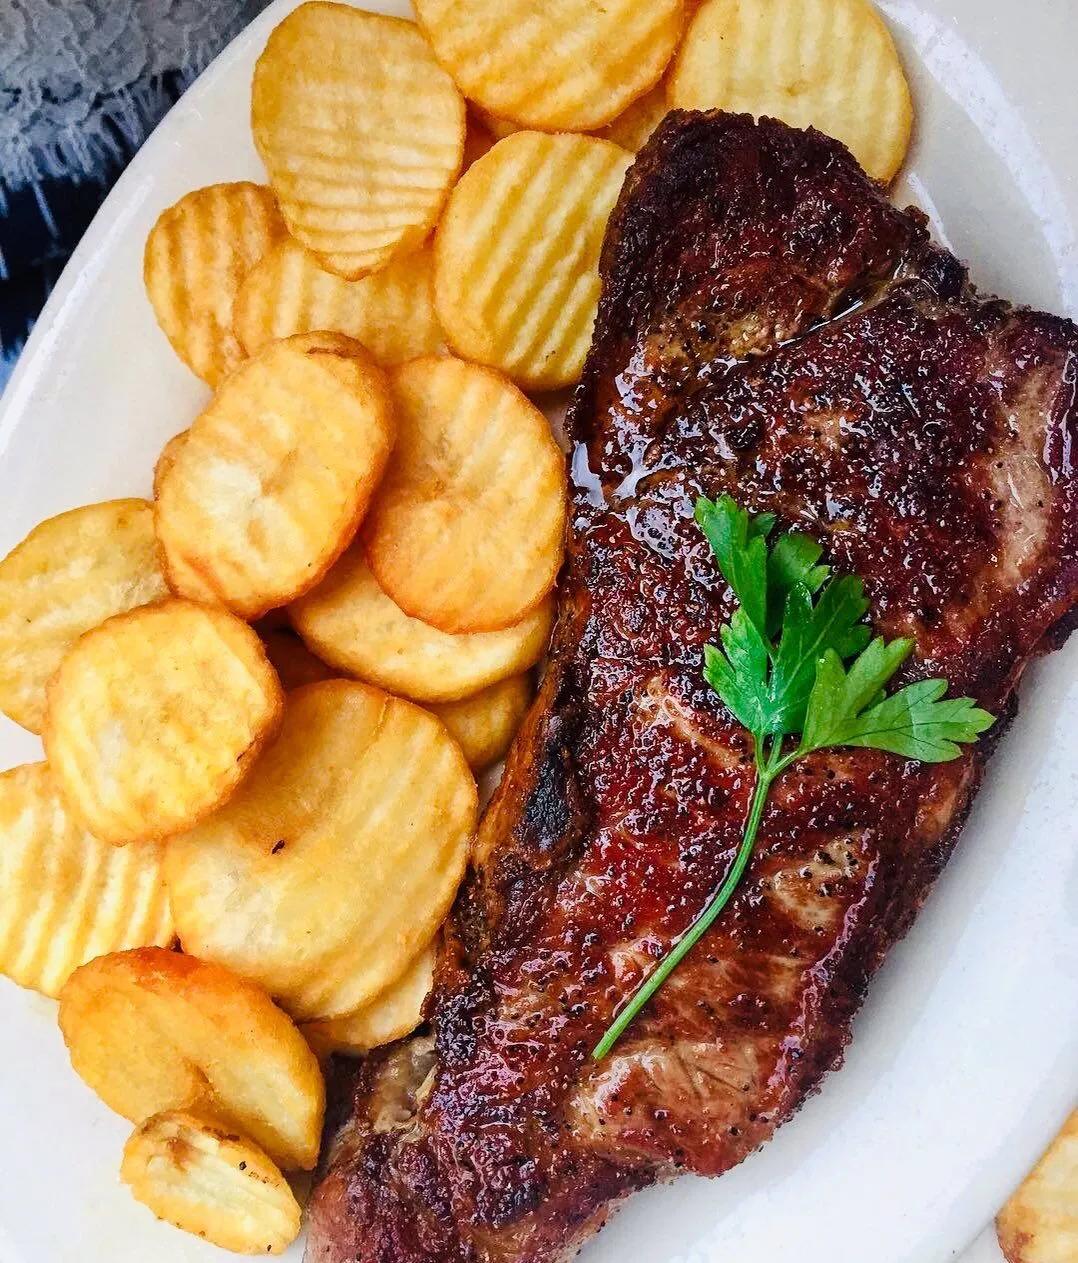 steak &amp; chips made by me | This Photo is posted on subreddit r/FoodPorn ...